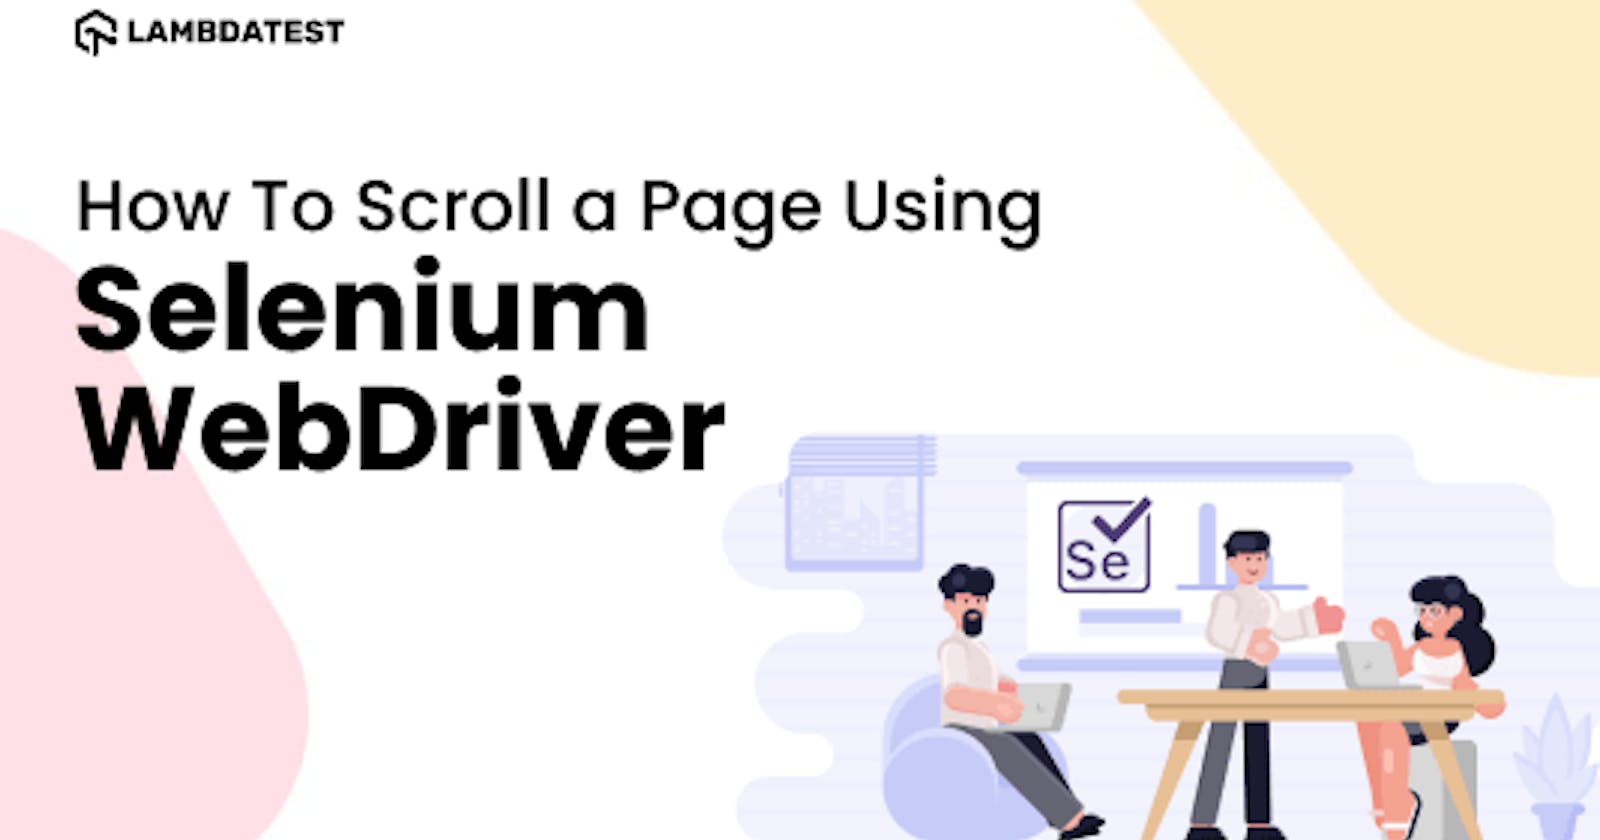 How To Scroll a Page Using Selenium WebDriver?